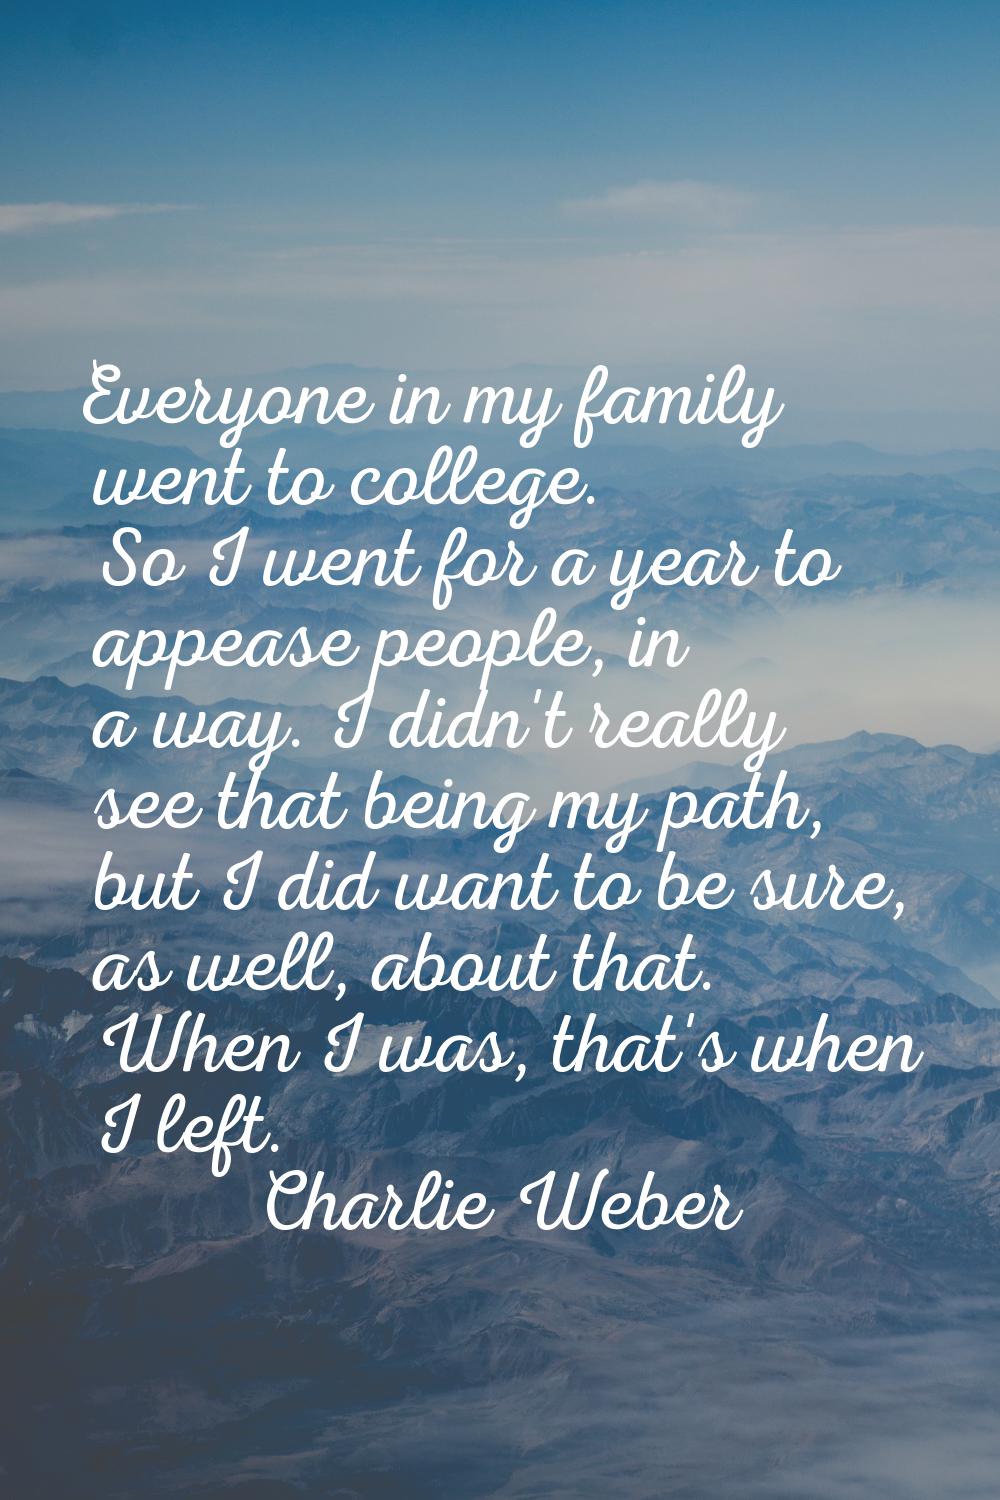 Everyone in my family went to college. So I went for a year to appease people, in a way. I didn't r